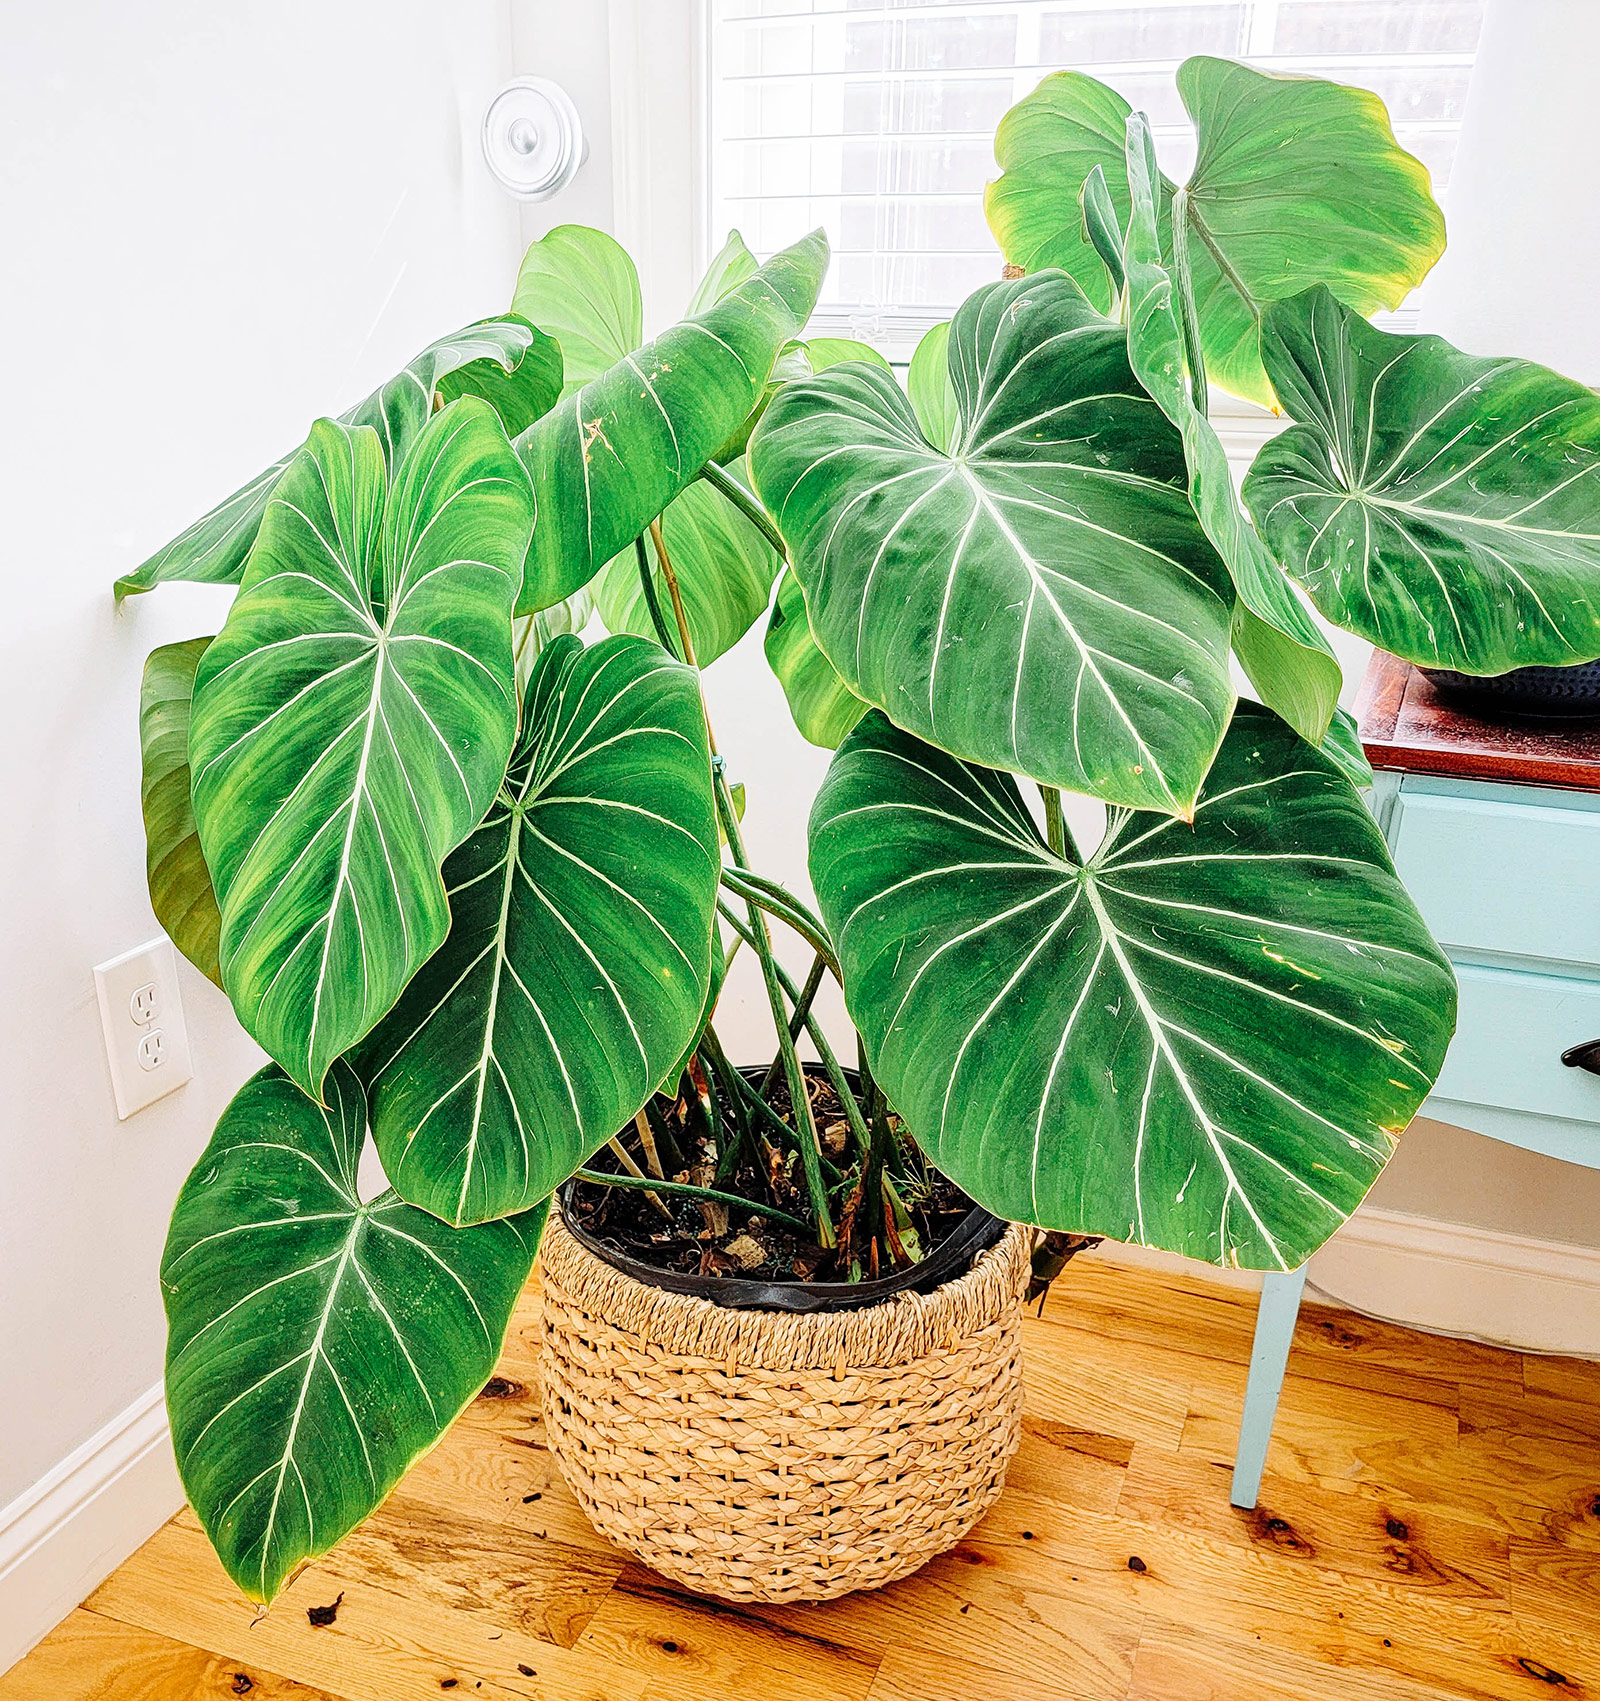 A mature Philodendron gloriosum houseplant with extra large leaves in a wicker pot displayed in the corner of a room